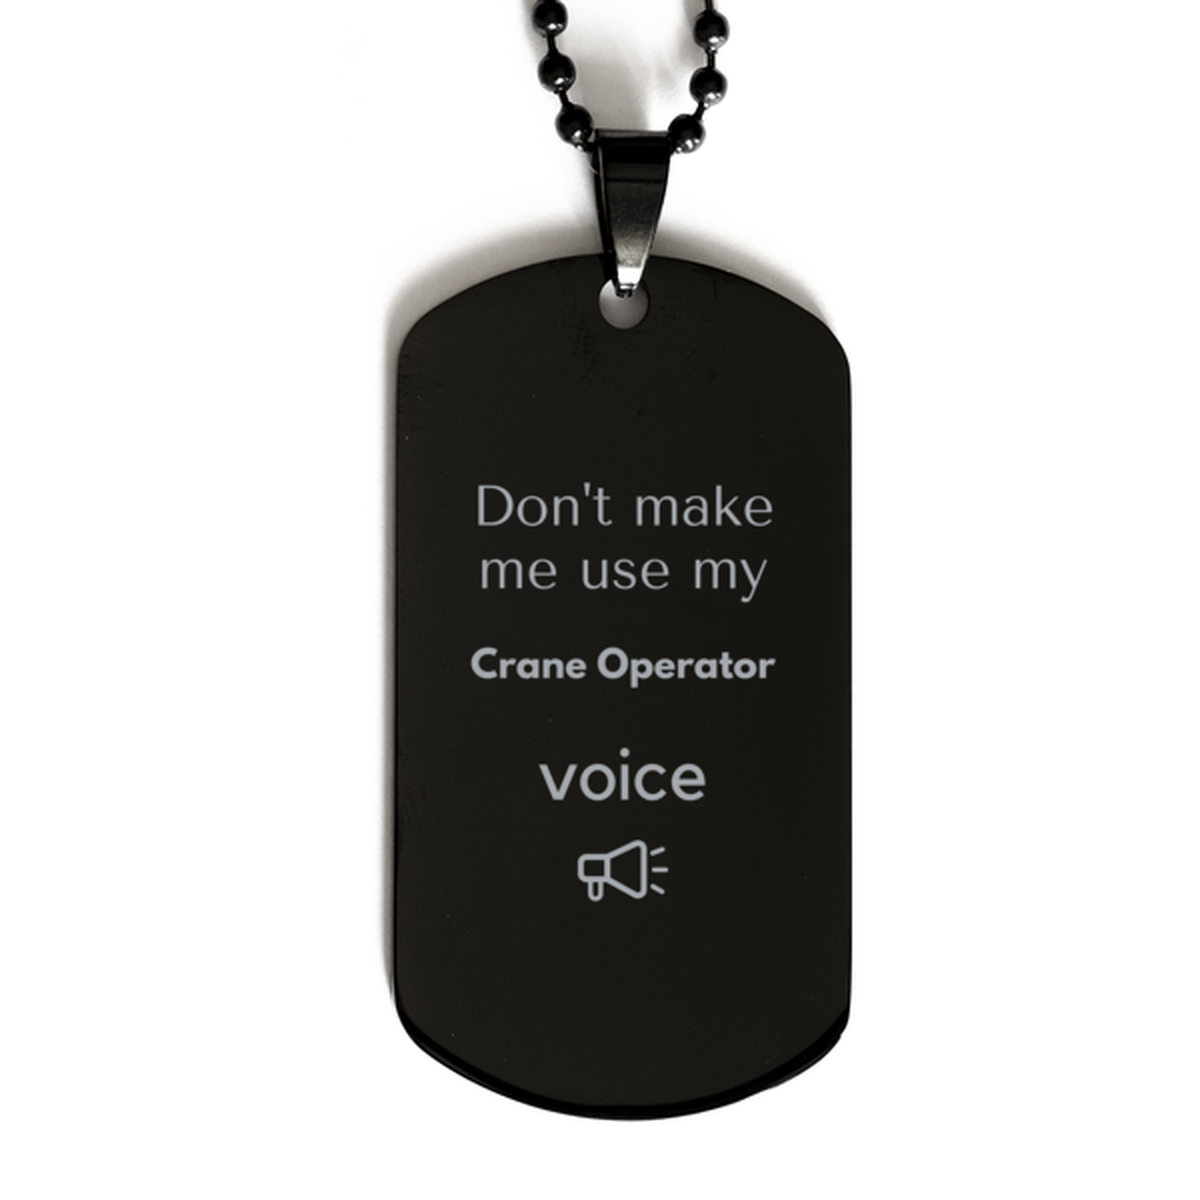 Don't make me use my Crane Operator voice, Sarcasm Crane Operator Gifts, Christmas Crane Operator Black Dog Tag Birthday Unique Gifts For Crane Operator Coworkers, Men, Women, Colleague, Friends